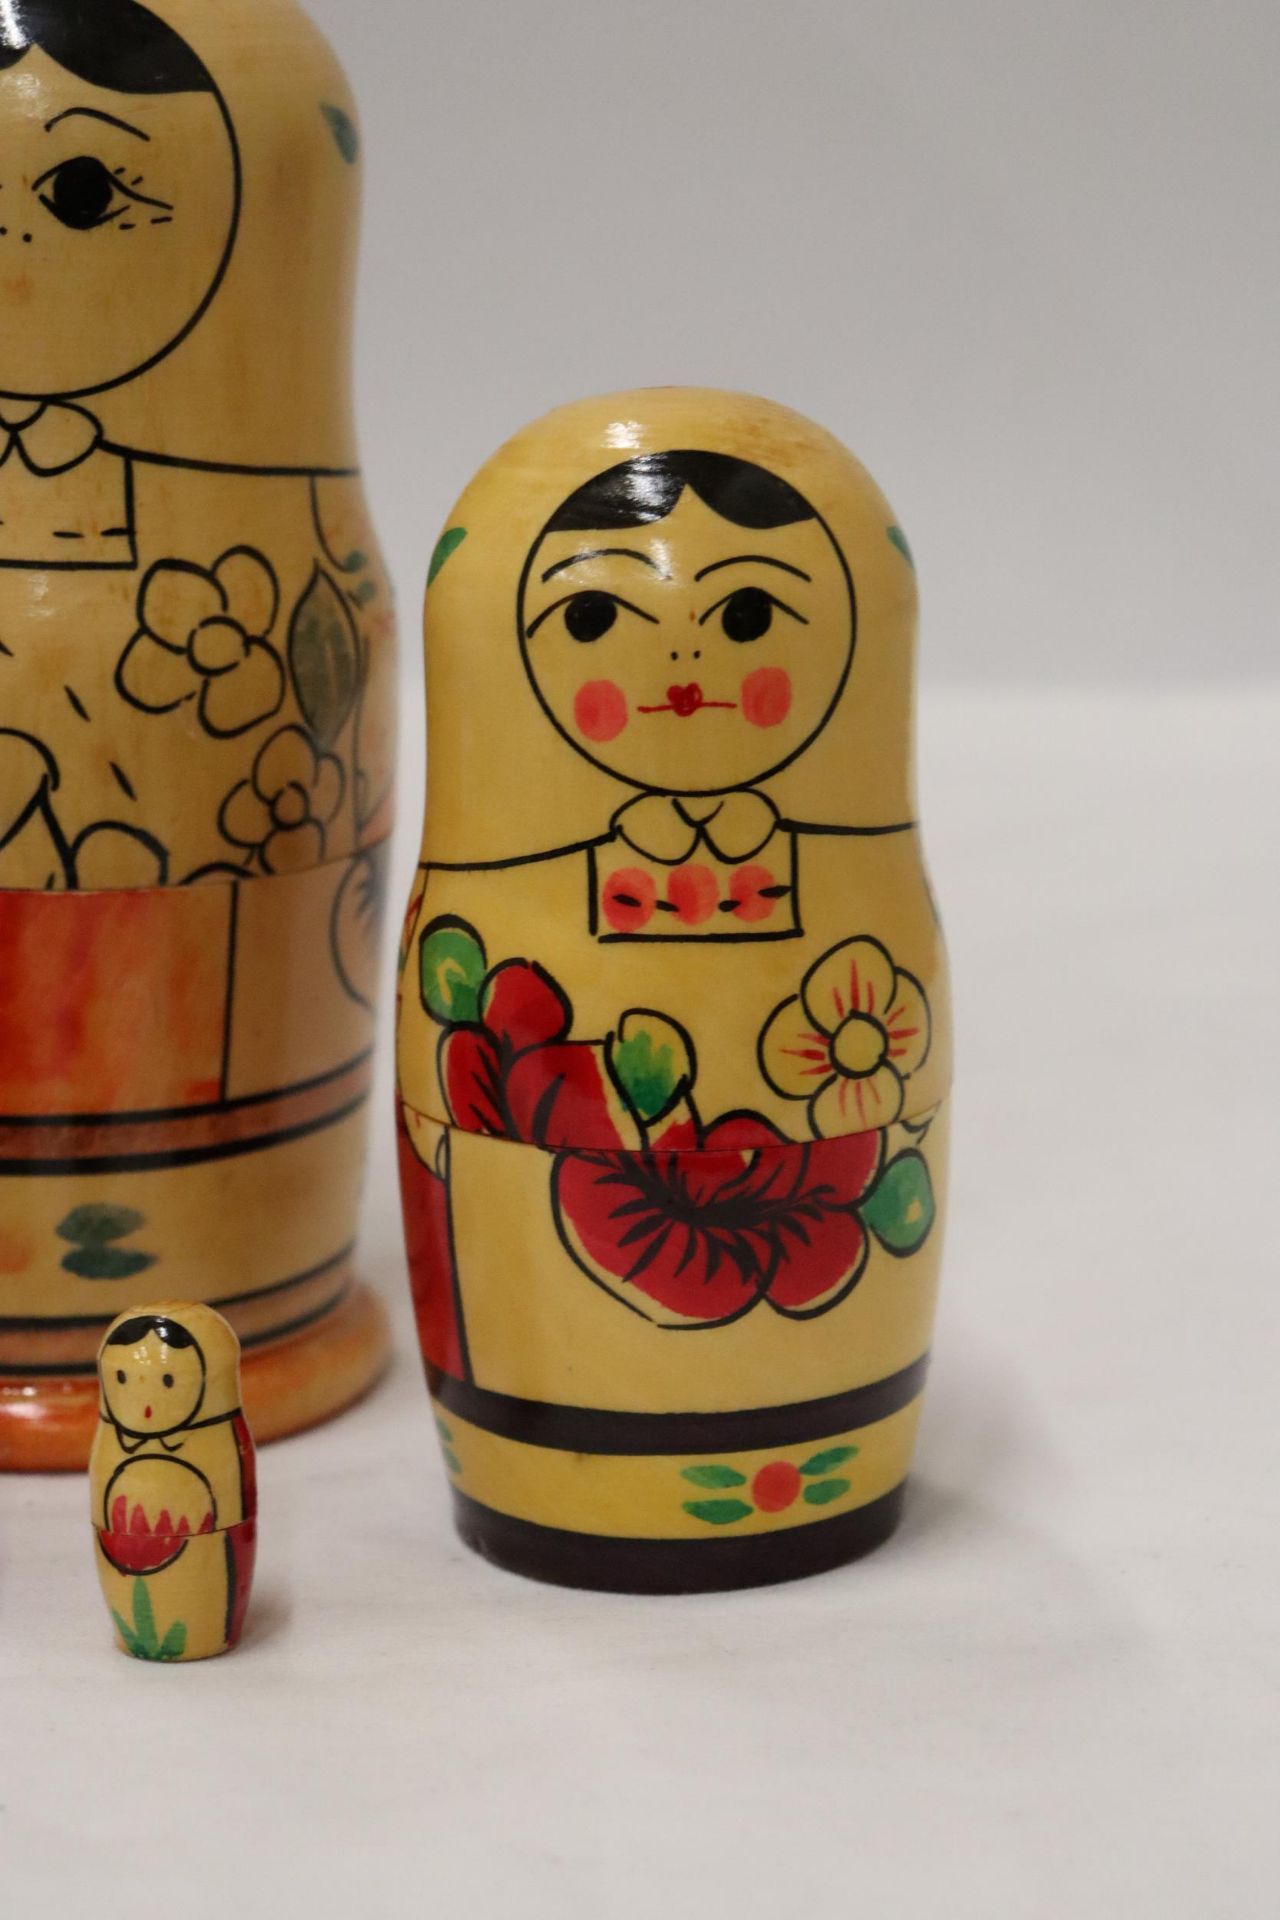 A LARGE RUSSIAN NESTING DOLL - Image 3 of 7